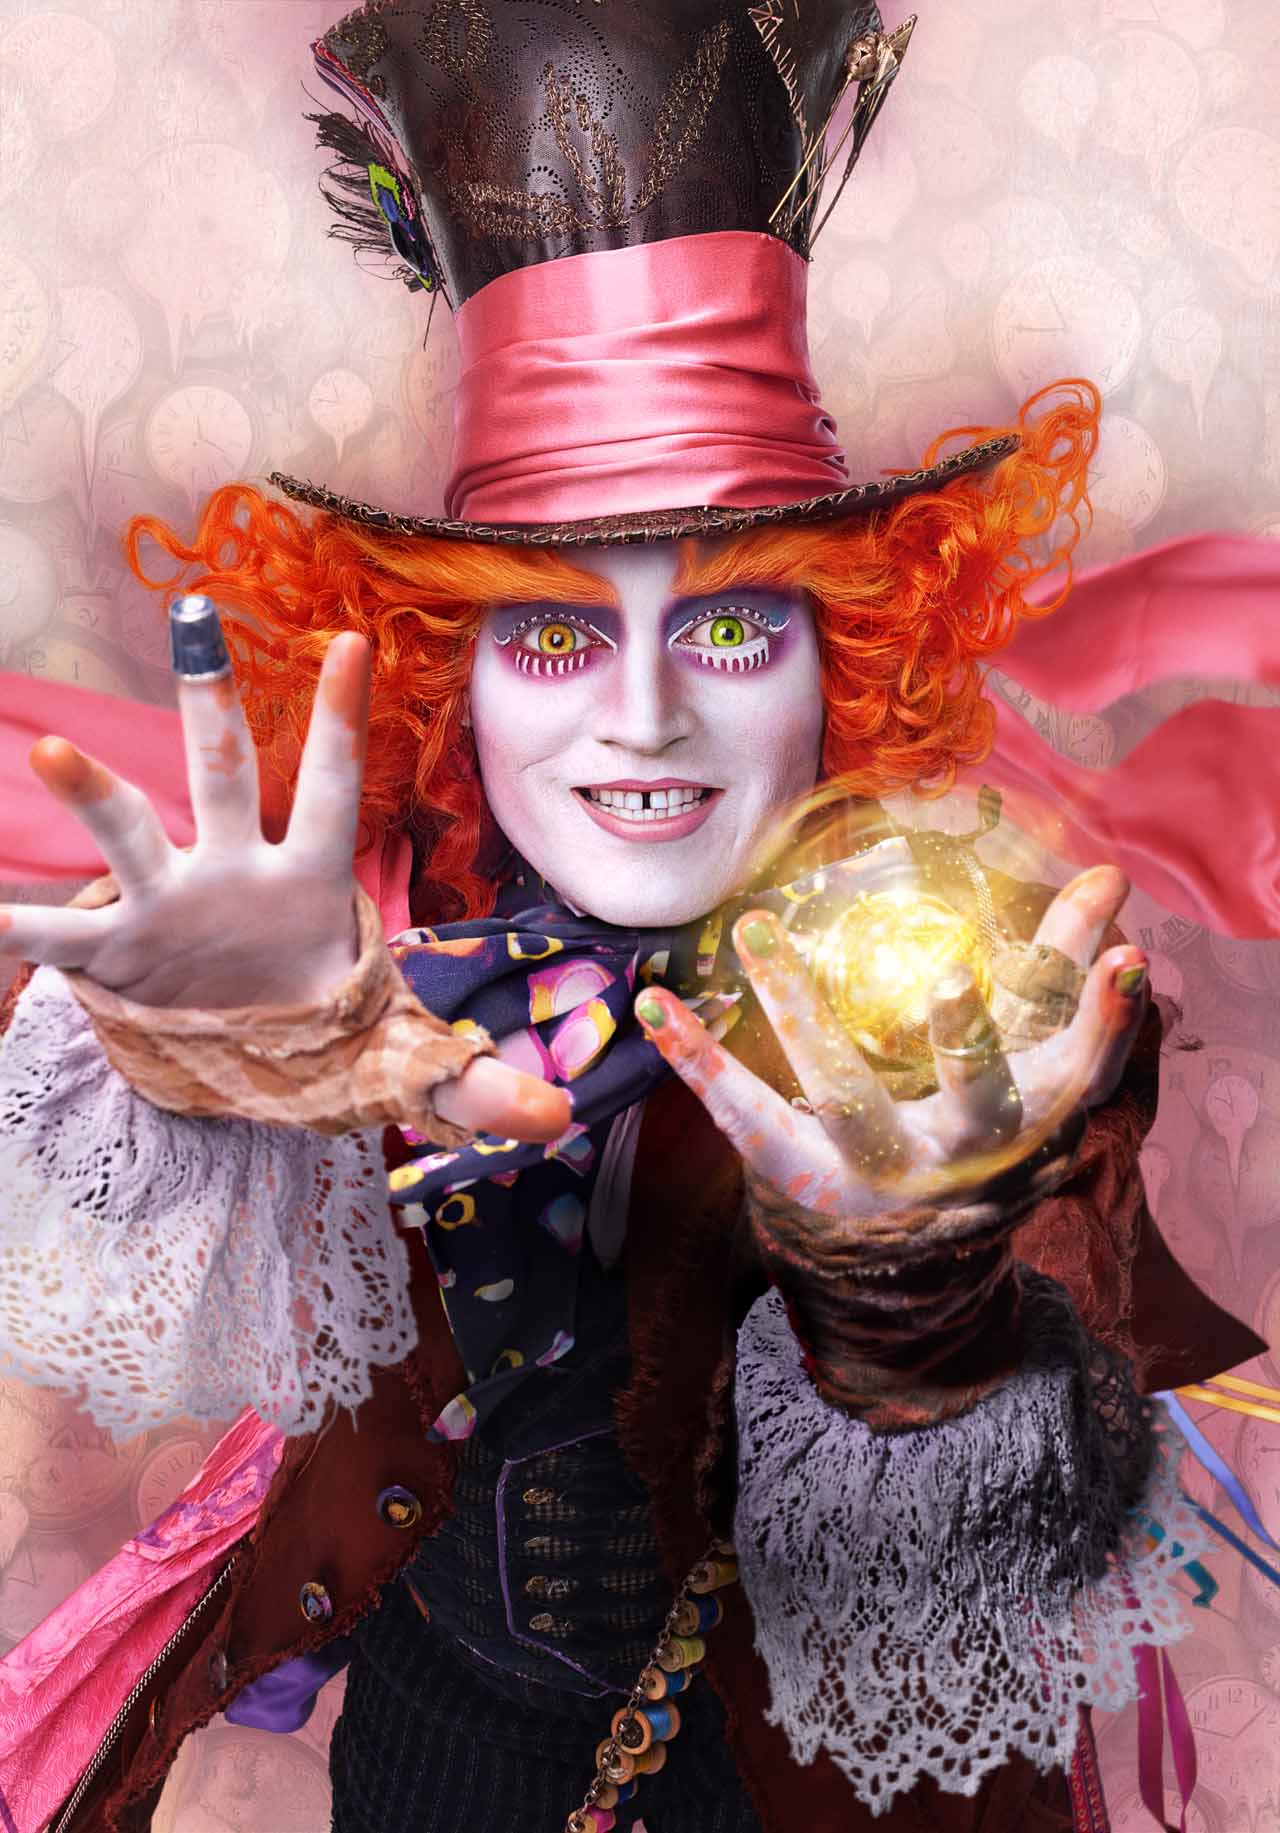 Alice Through The Looking Glass (2016) Backgrounds, Compatible - PC, Mobile, Gadgets| 1280x1833 px